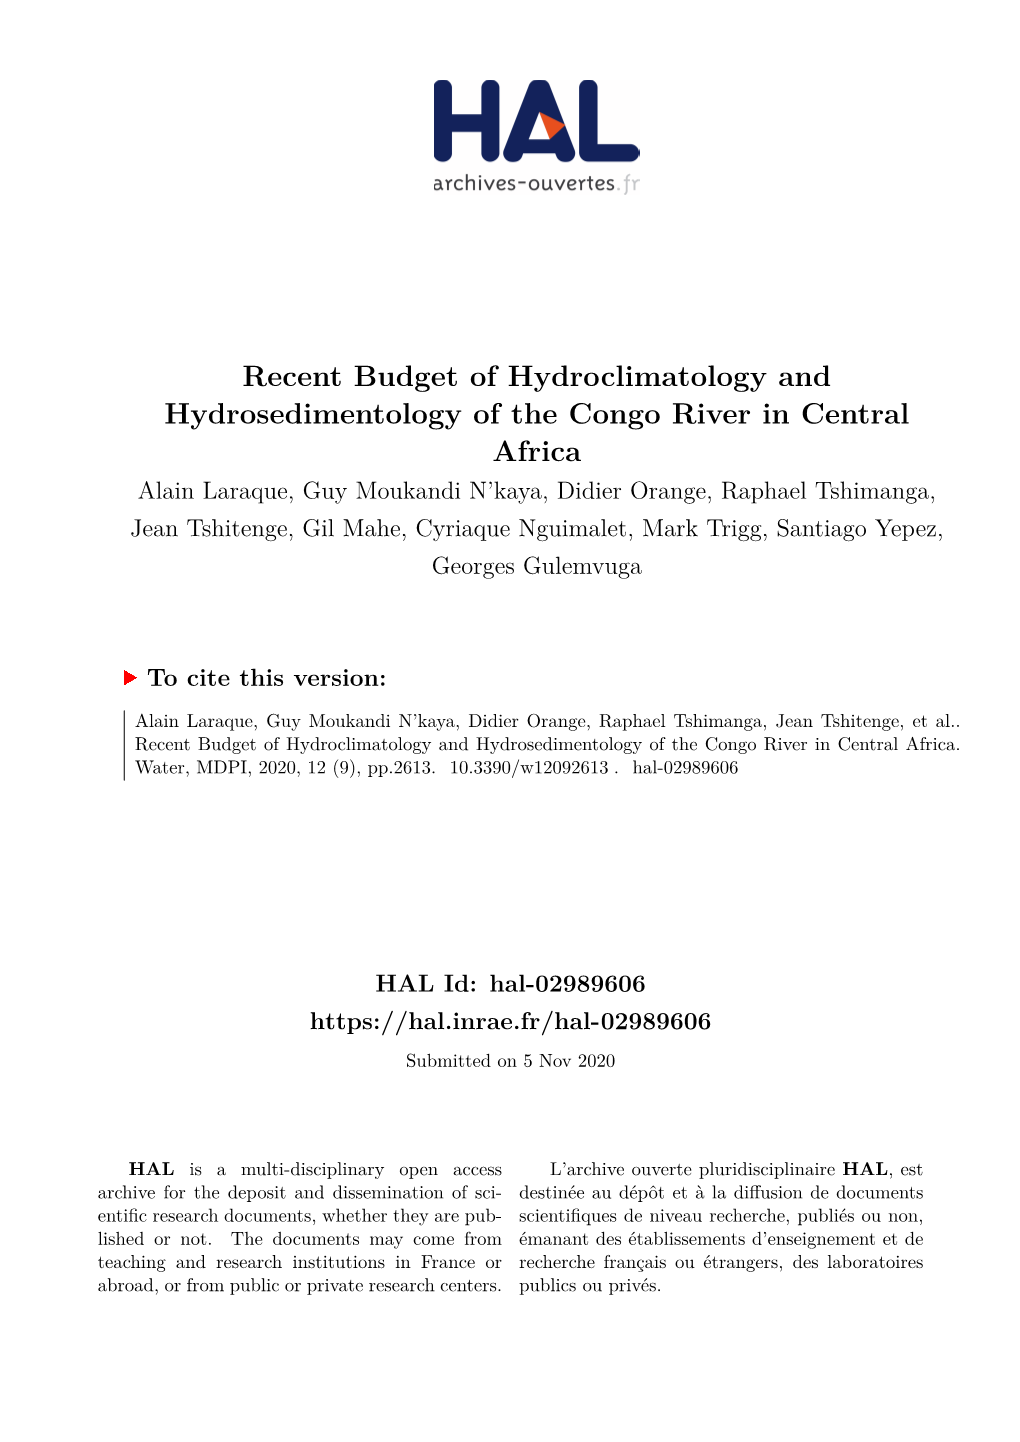 Recent Budget of Hydroclimatology and Hydrosedimentology of The